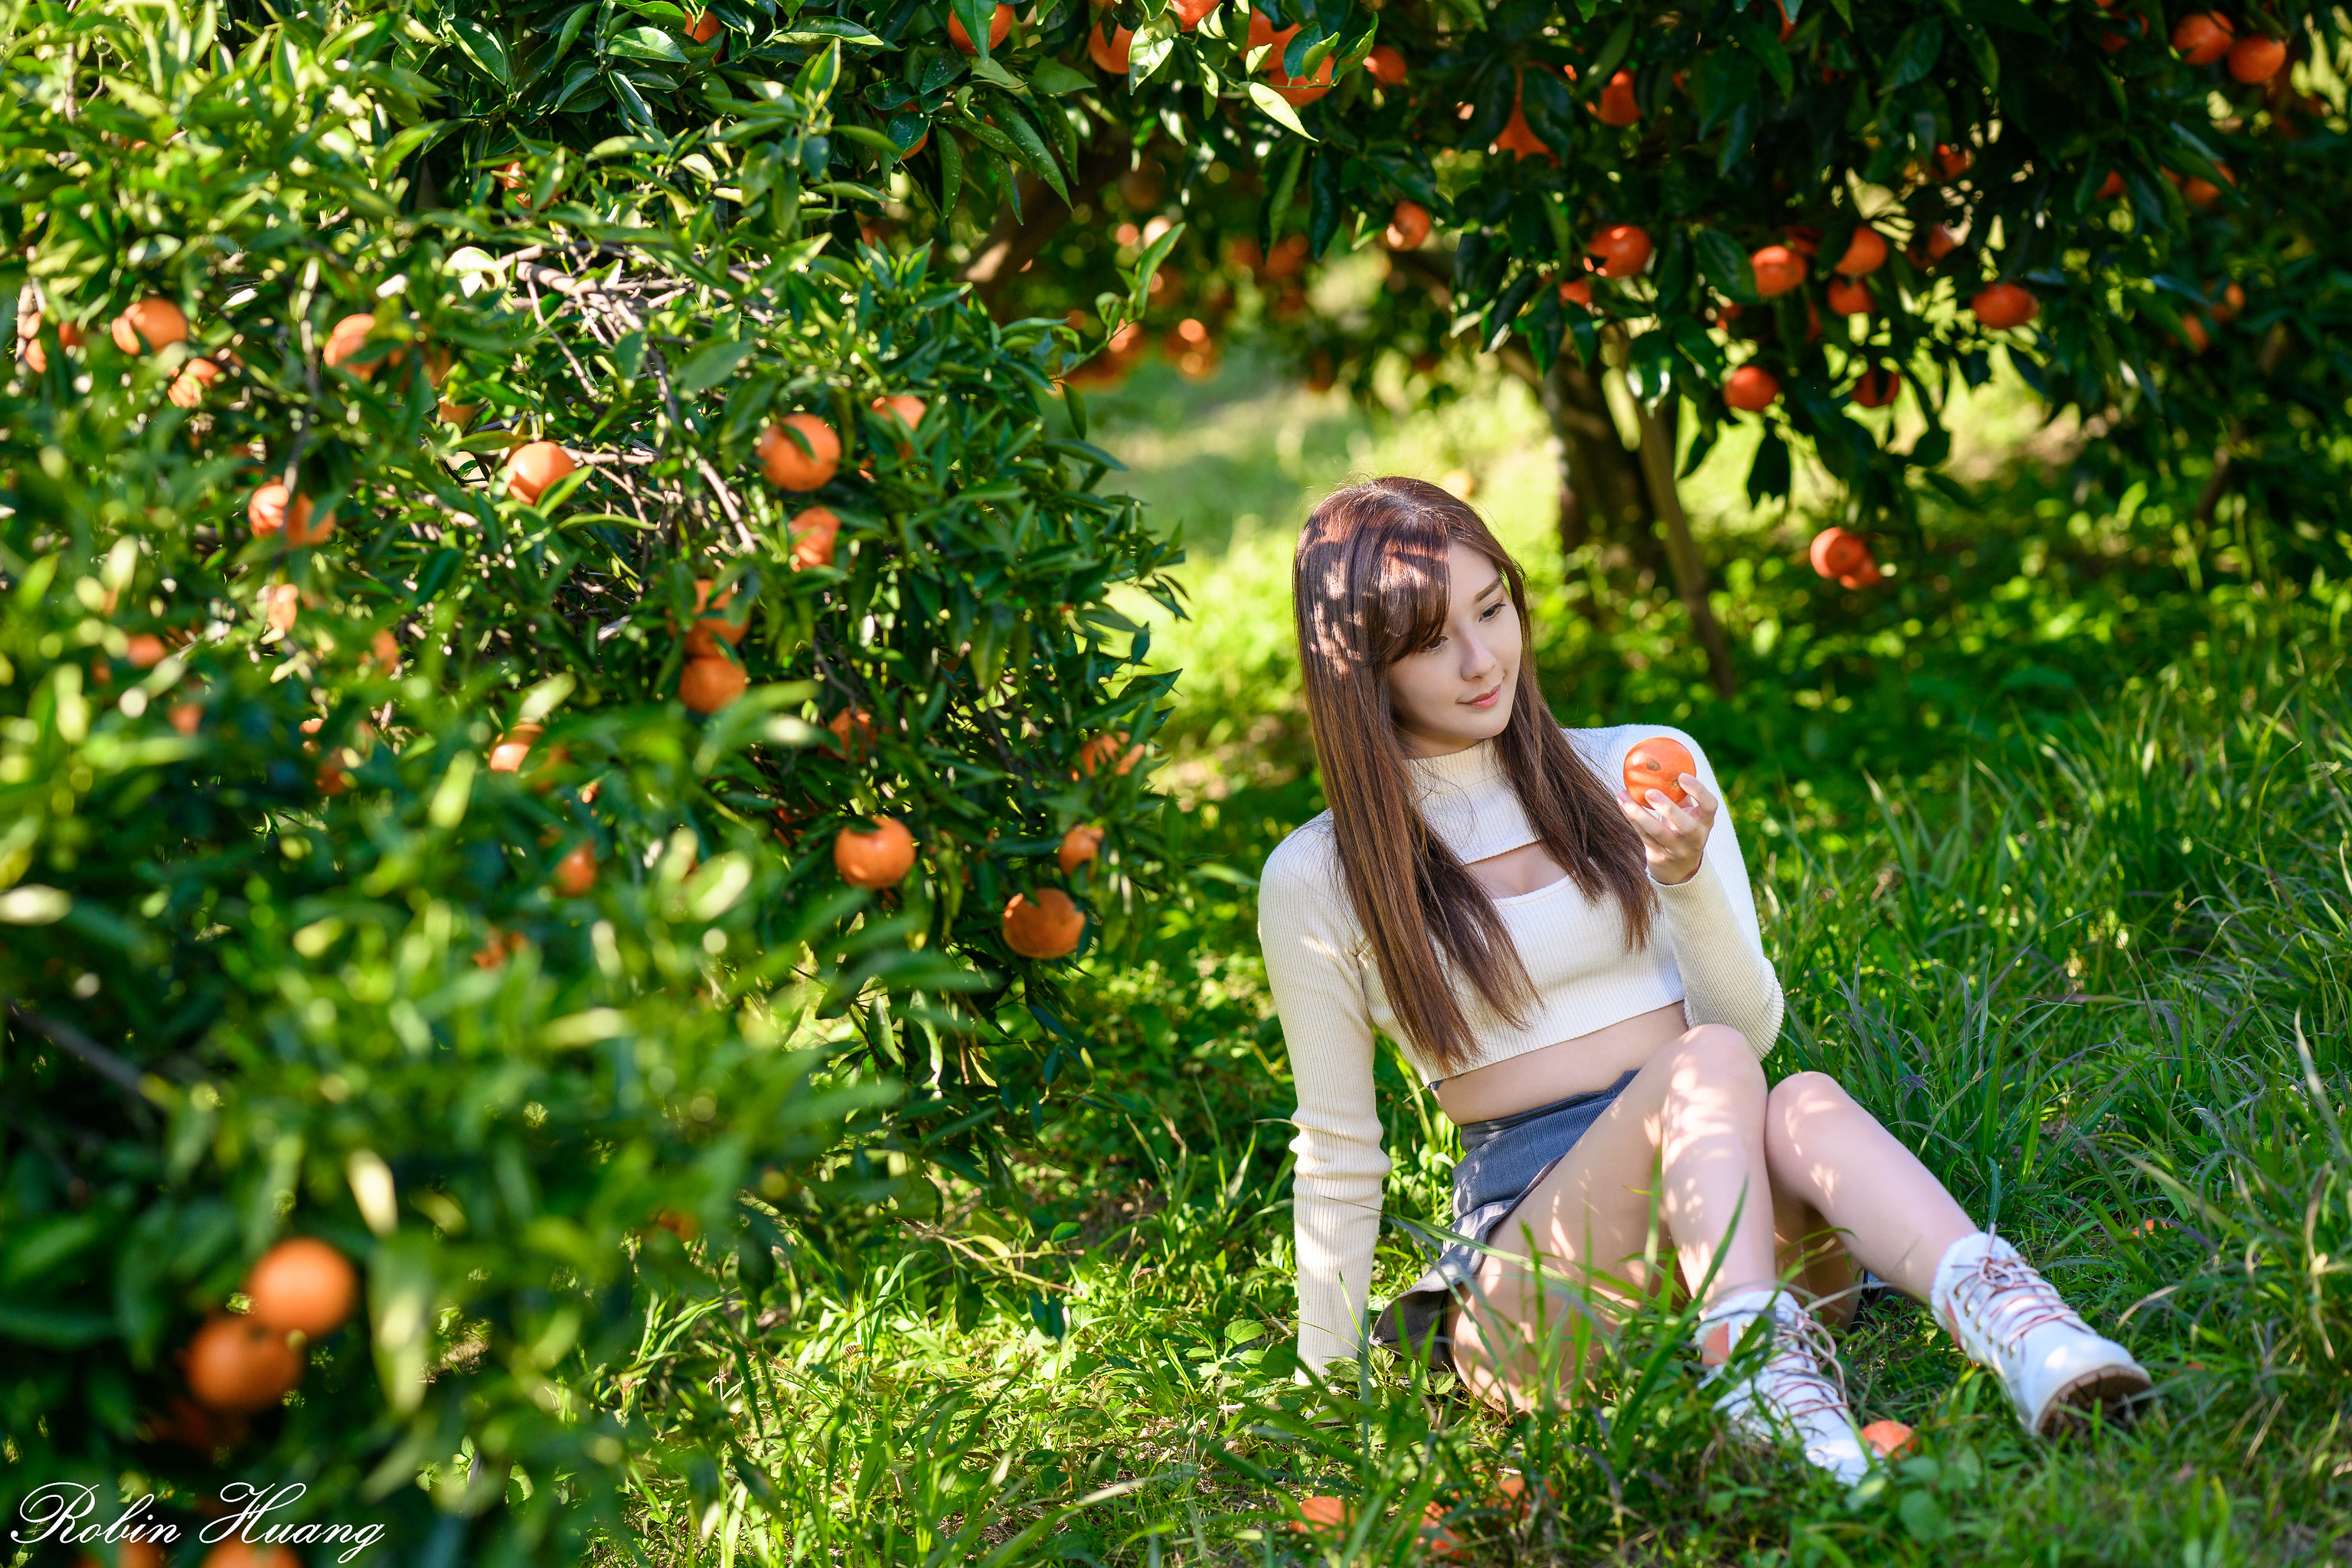 People 3072x2048 women Asian casual grass Robin Huang watermarked orange (fruit) brunette orchards